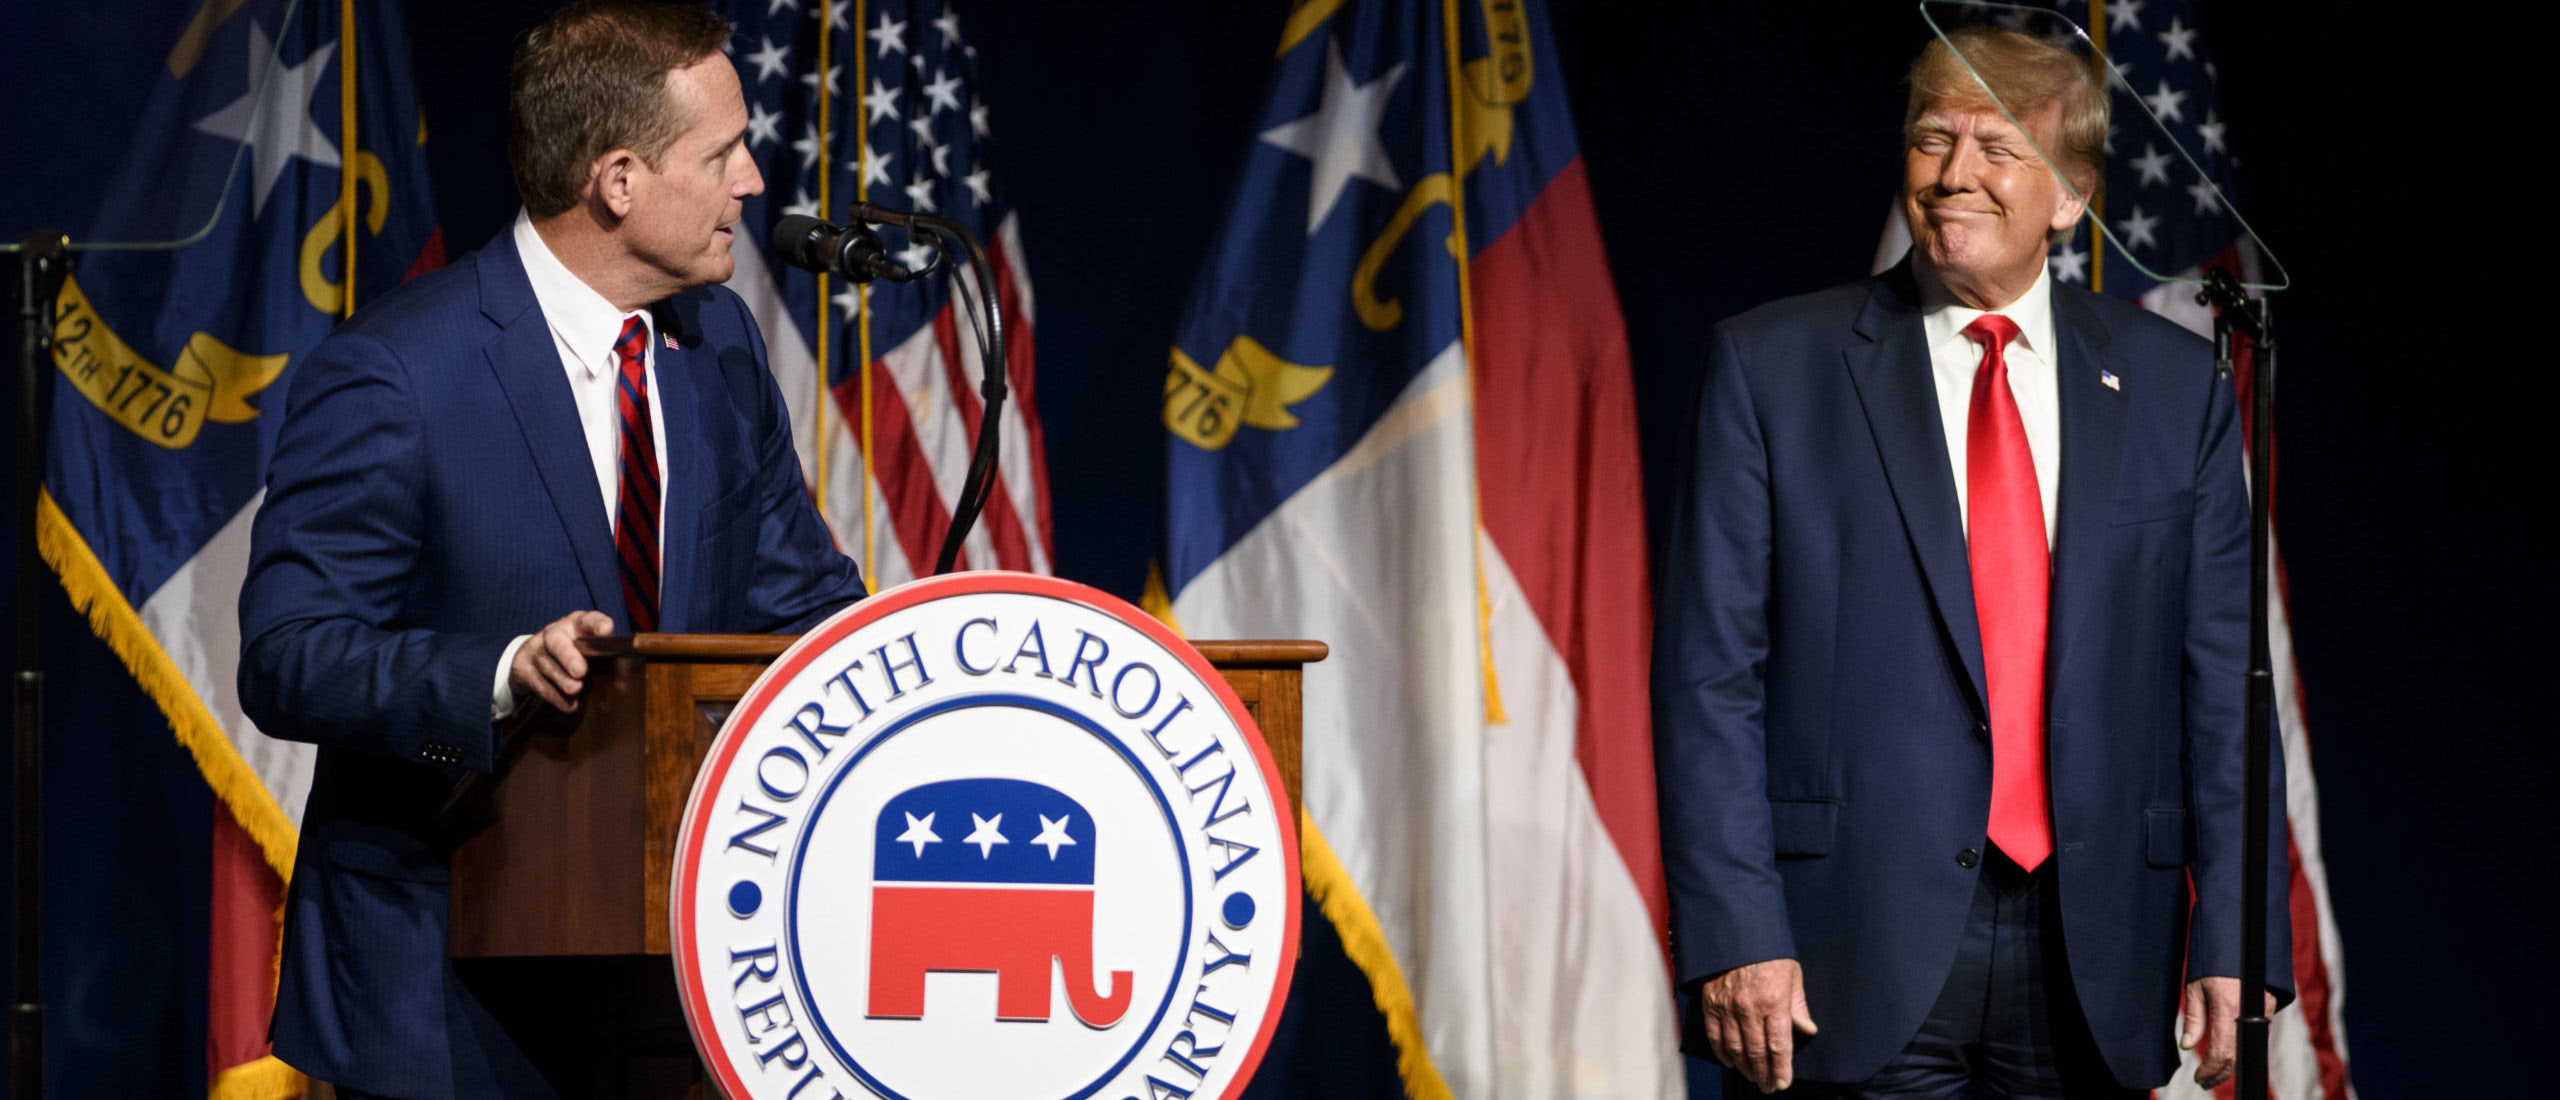 Trump Reportedly Makes Deal To Clear North Carolina GOP Senate Field So His Candidate Can Win